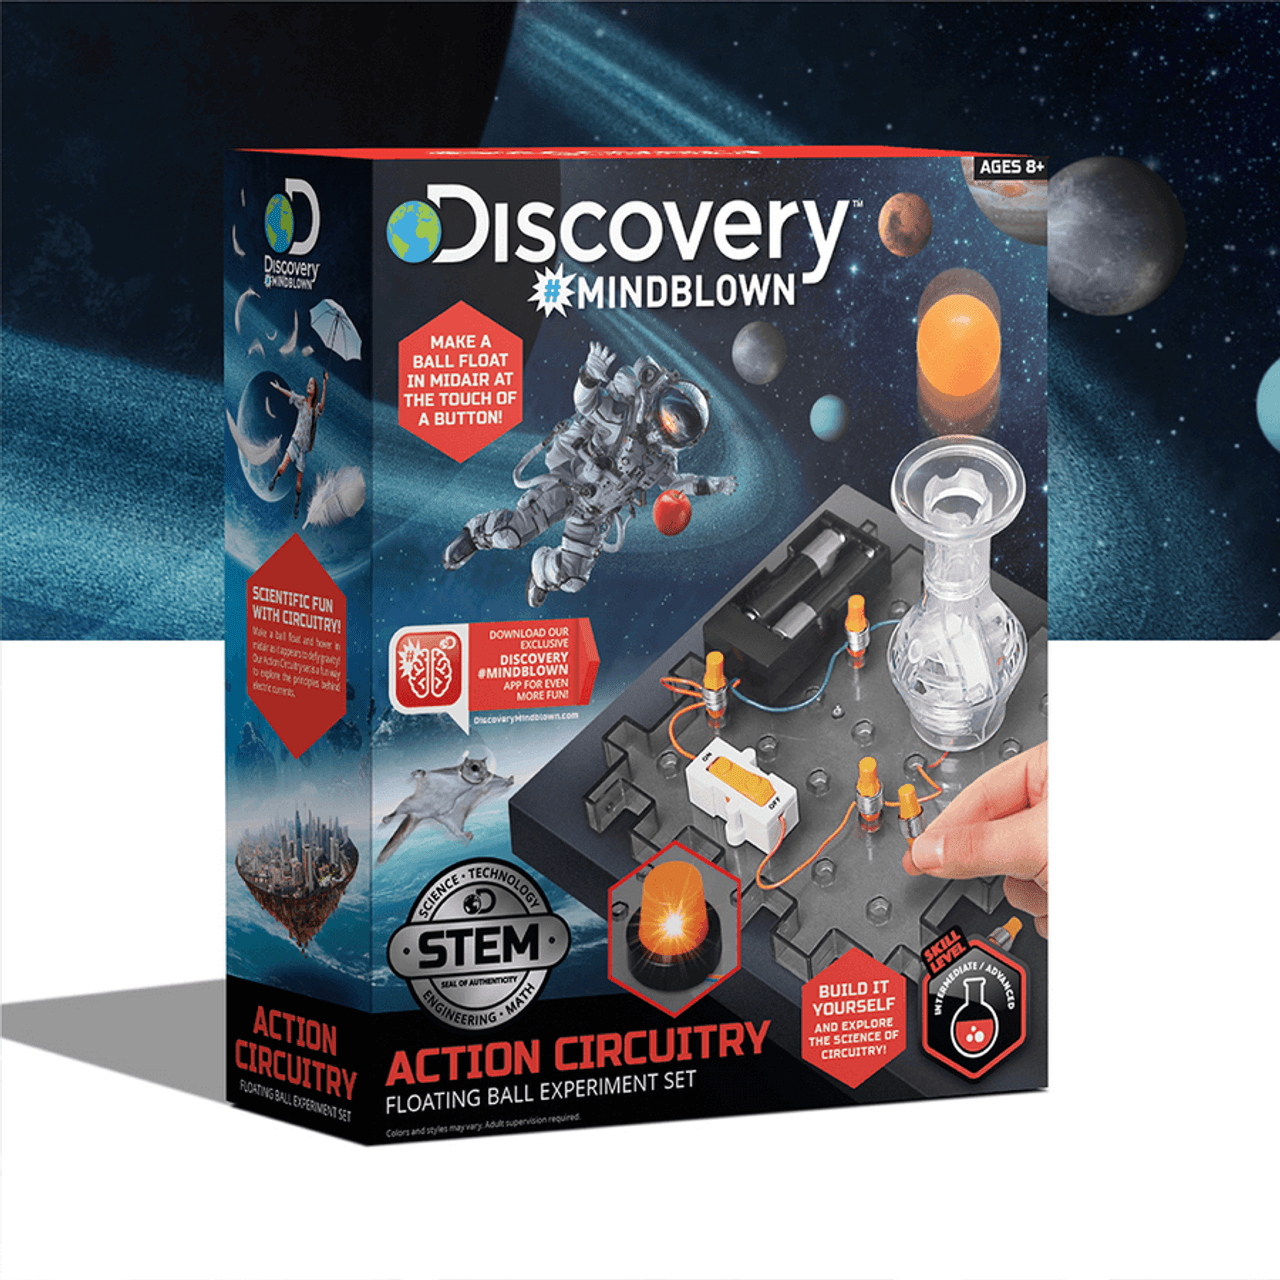 DISCOVERY ACTION CIRCUITRY FLOATING BALL